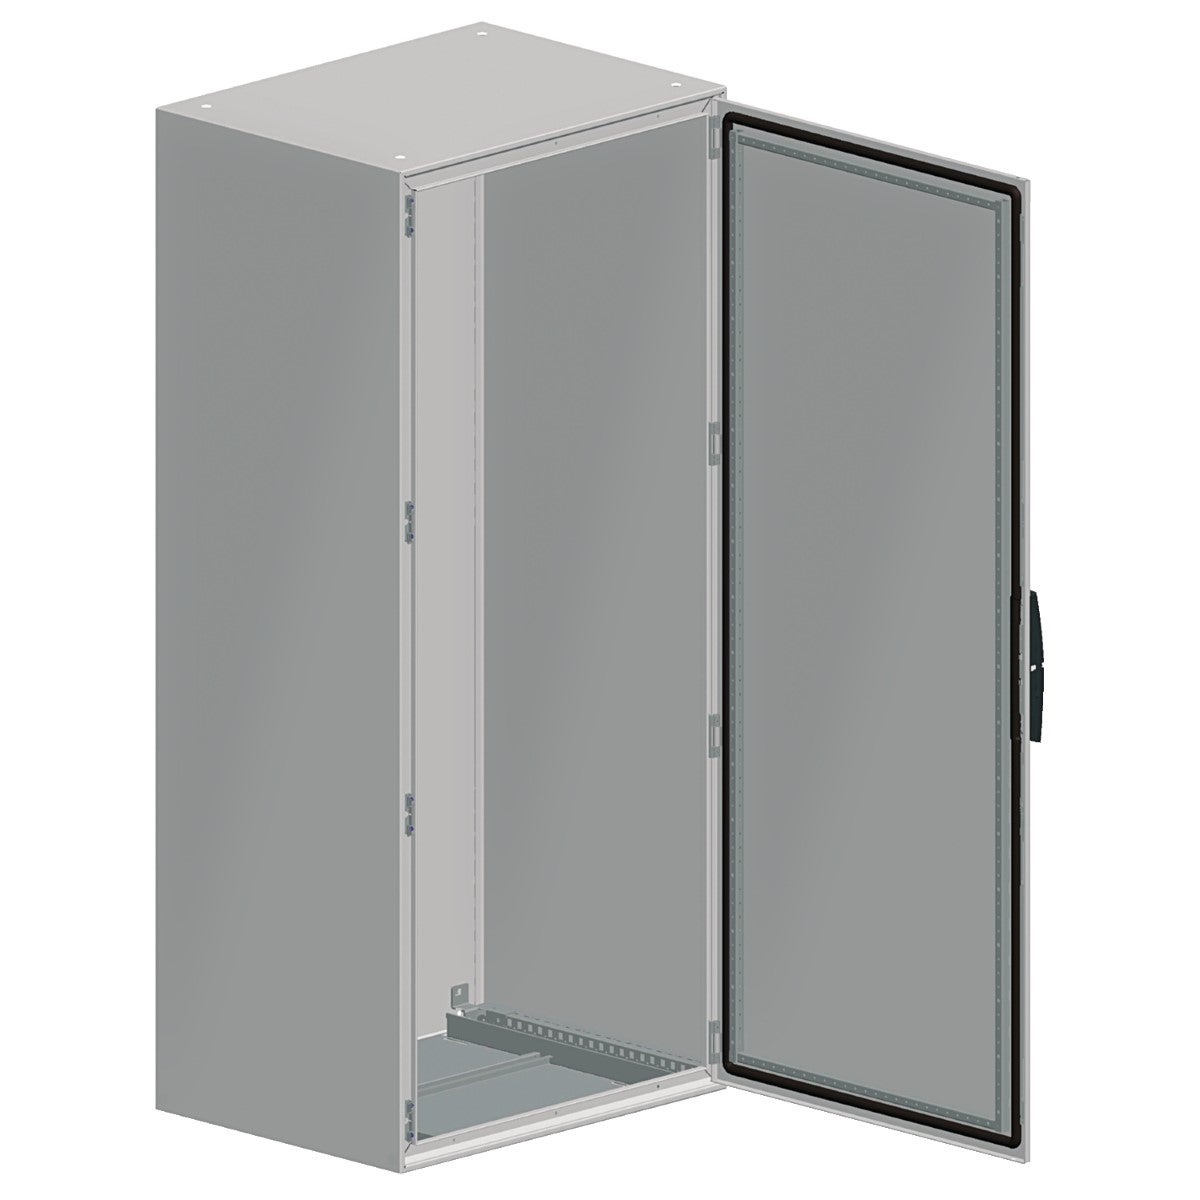 Spacial SM compact enclosure with mounting plate - 2000x800x600 mm